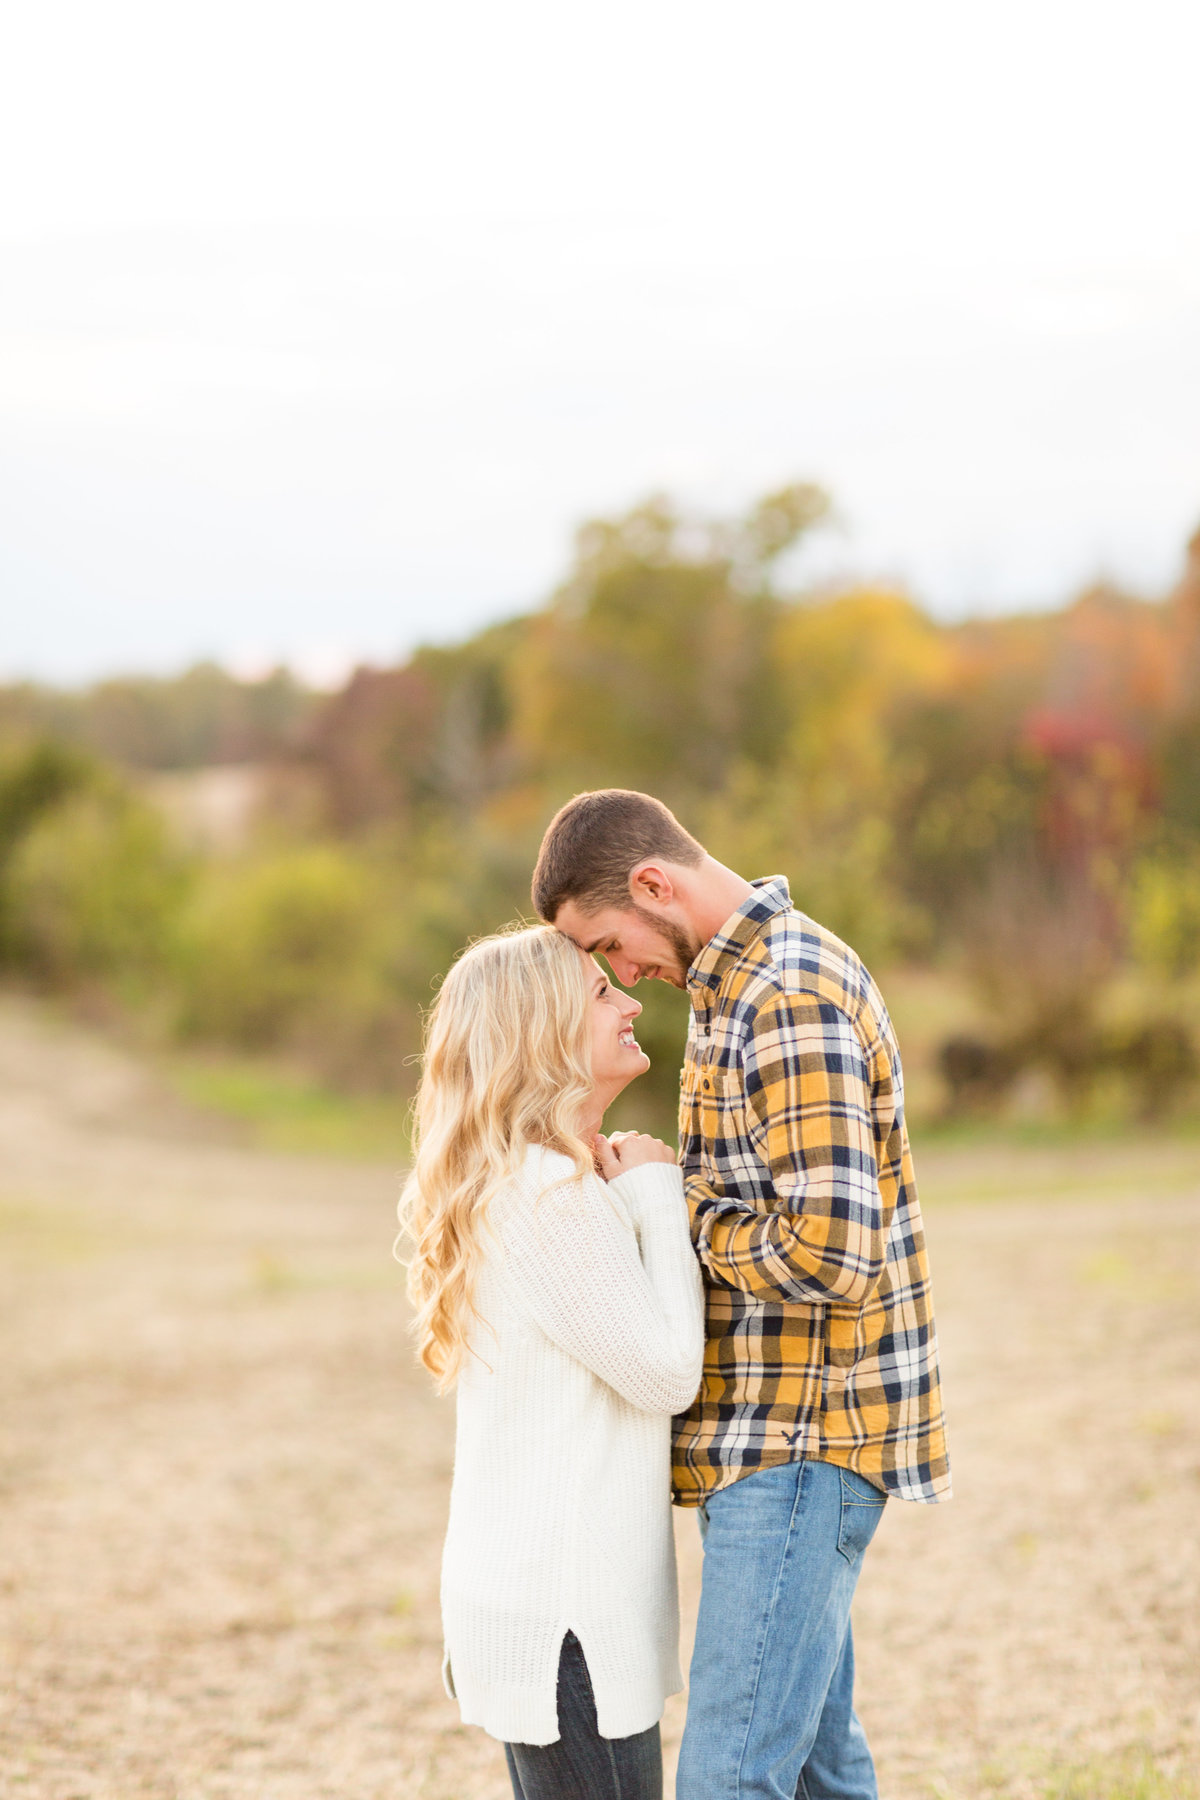 Stafford, Virginia engagement photography by Marie Hamilton Photography